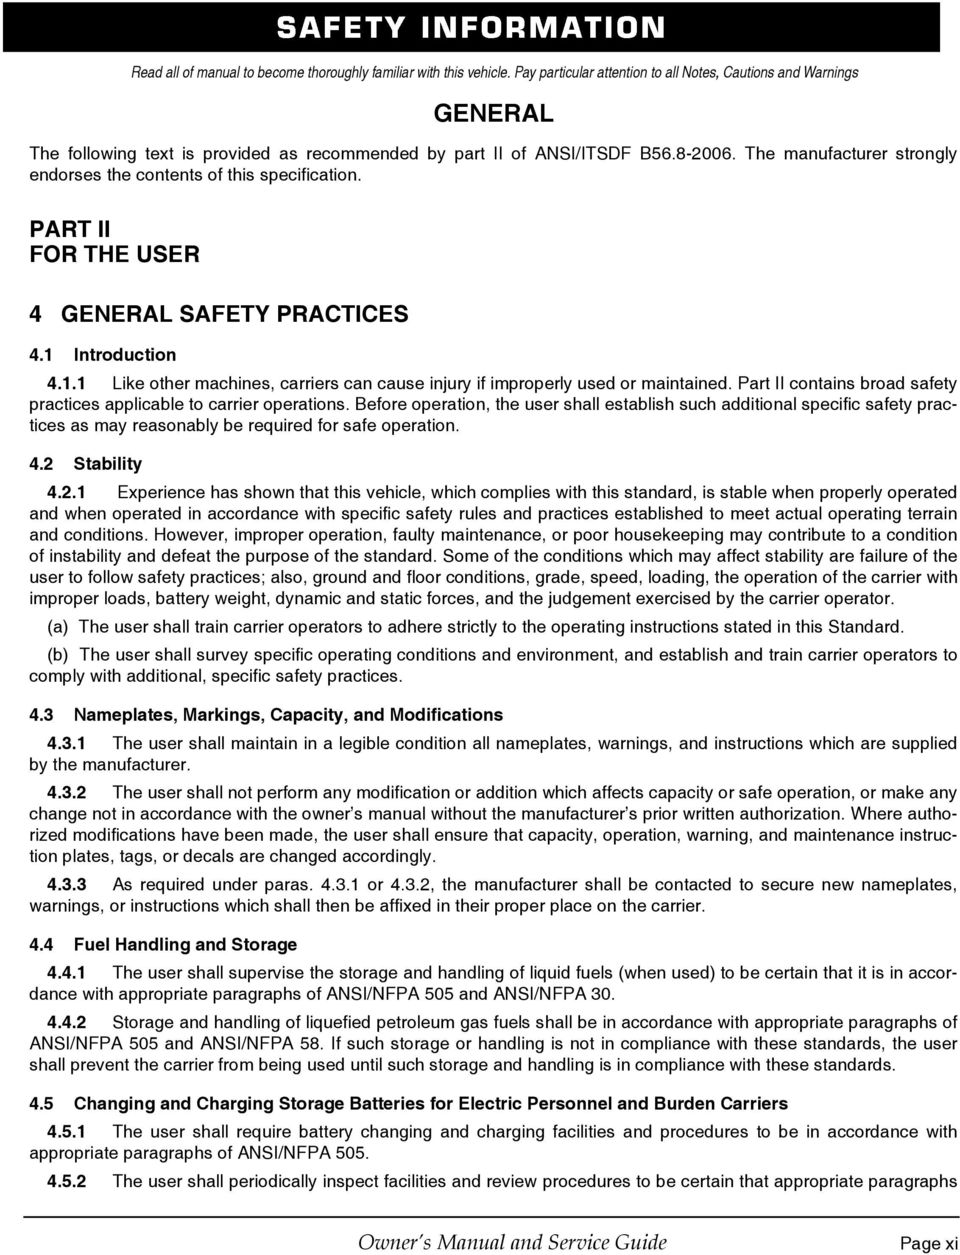 The manufacturer strongly endorses the contents of this specification. PART II FOR THE USER 4 GENERAL SAFETY PRACTICES 4.1 